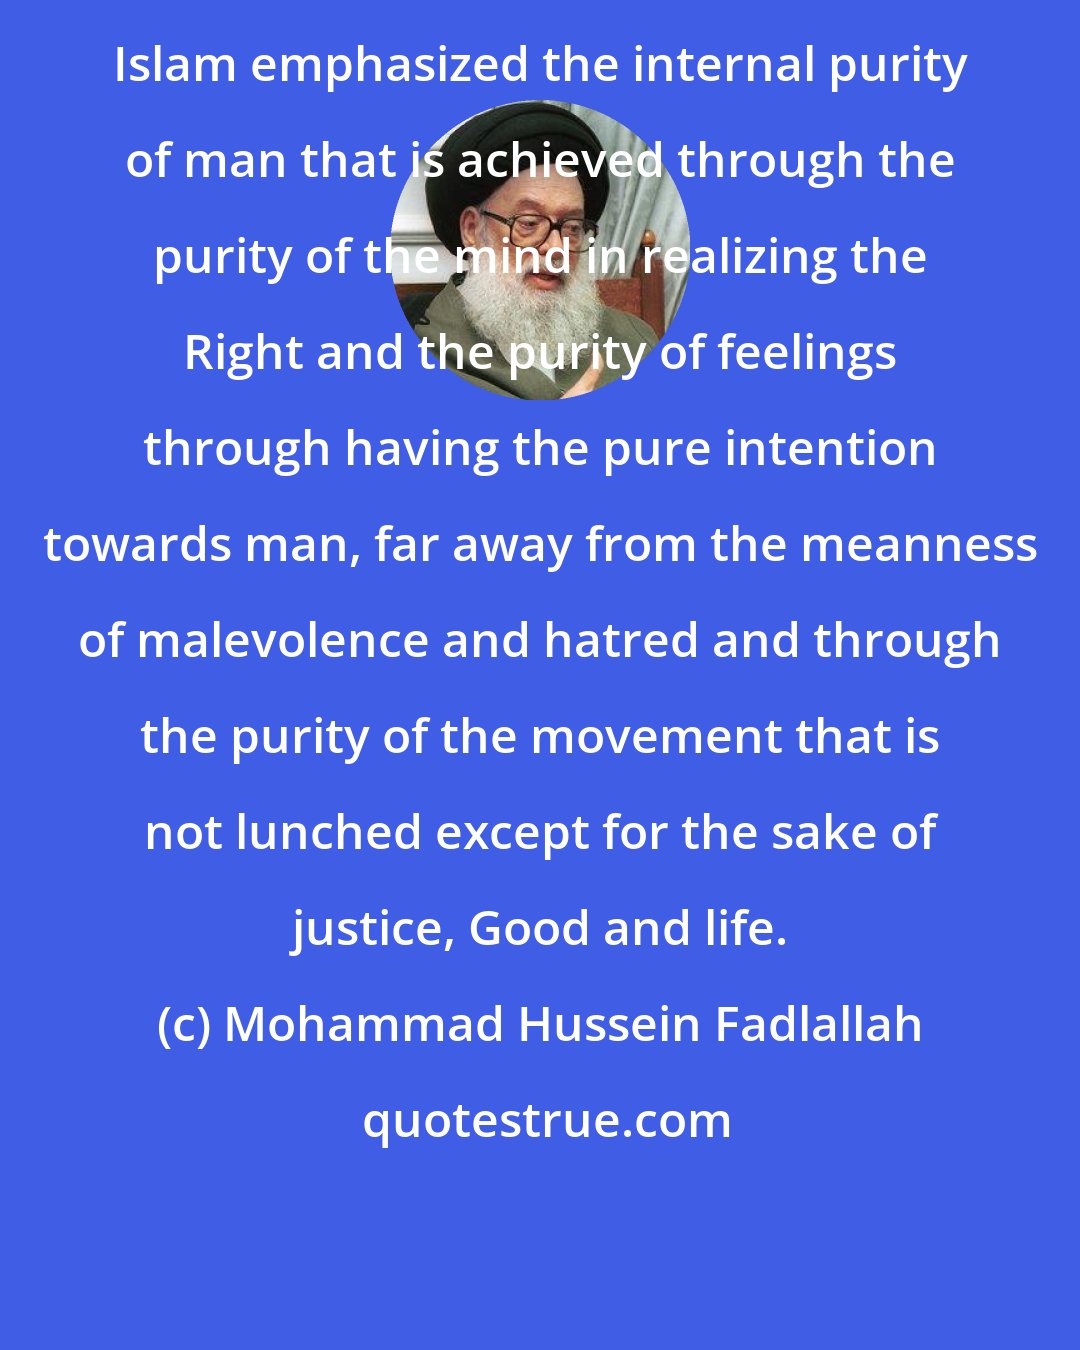 Mohammad Hussein Fadlallah: Islam emphasized the internal purity of man that is achieved through the purity of the mind in realizing the Right and the purity of feelings through having the pure intention towards man, far away from the meanness of malevolence and hatred and through the purity of the movement that is not lunched except for the sake of justice, Good and life.